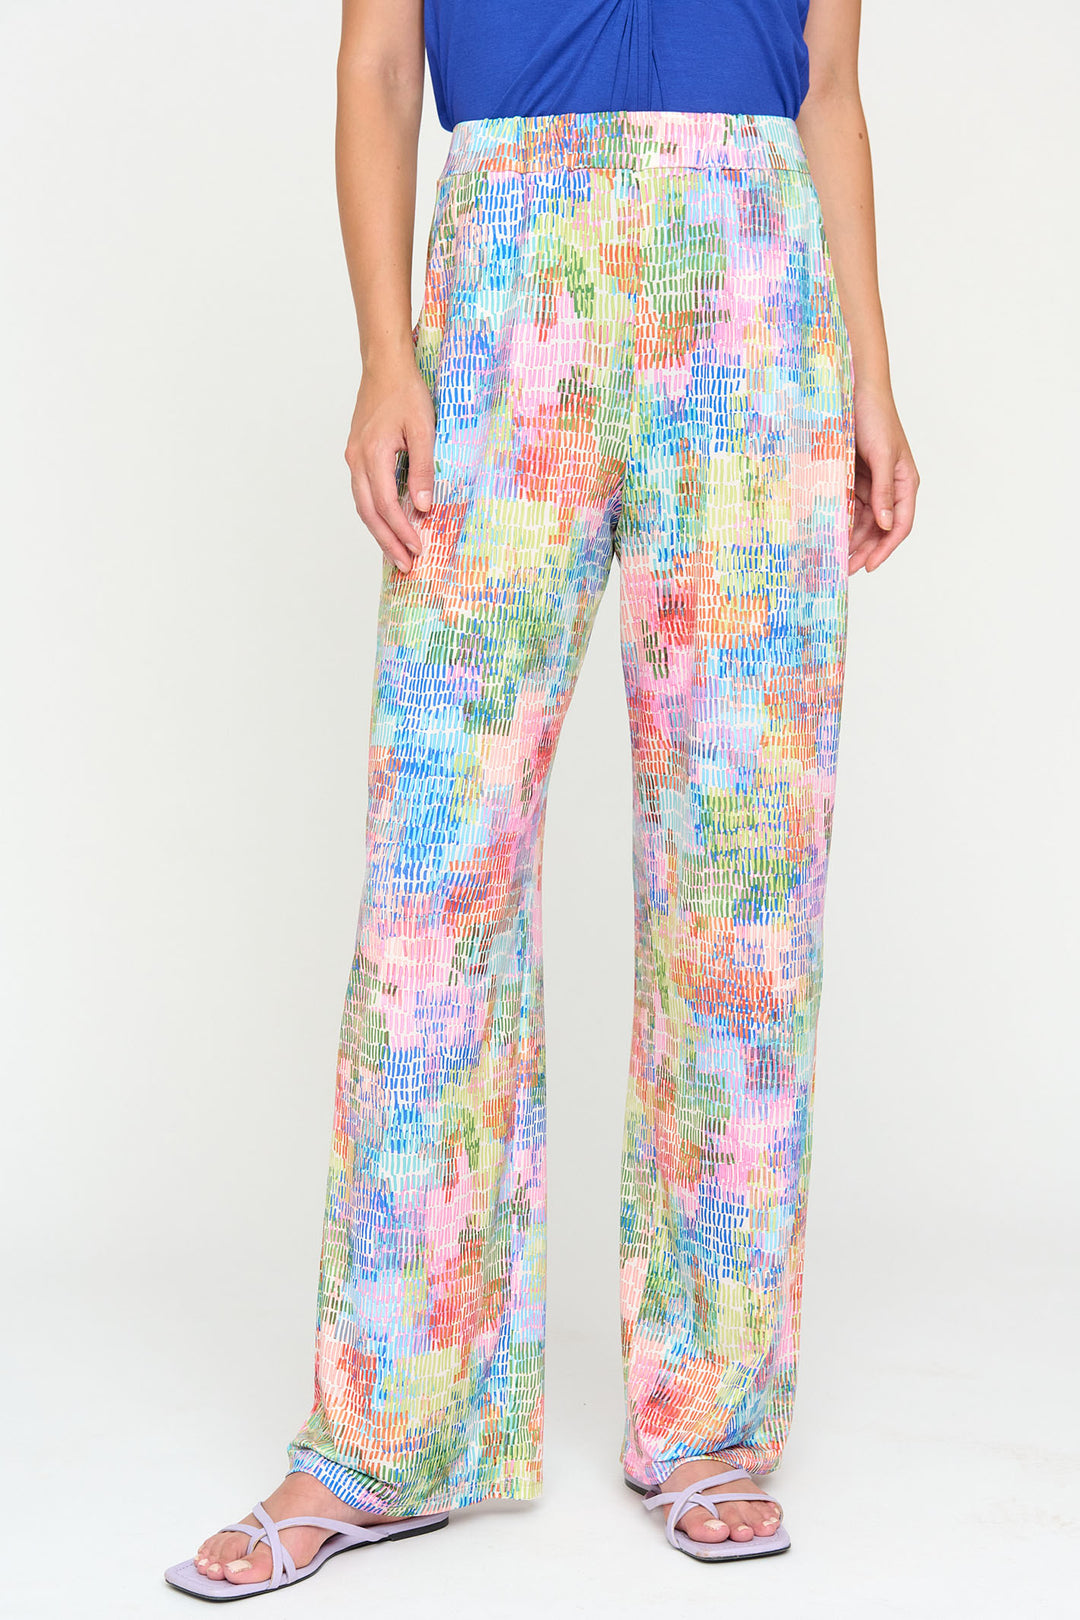 Tinta Genera Blue Multicolour Print Wide Leg Pull-On Trousers - Rouge Boutique Inverness